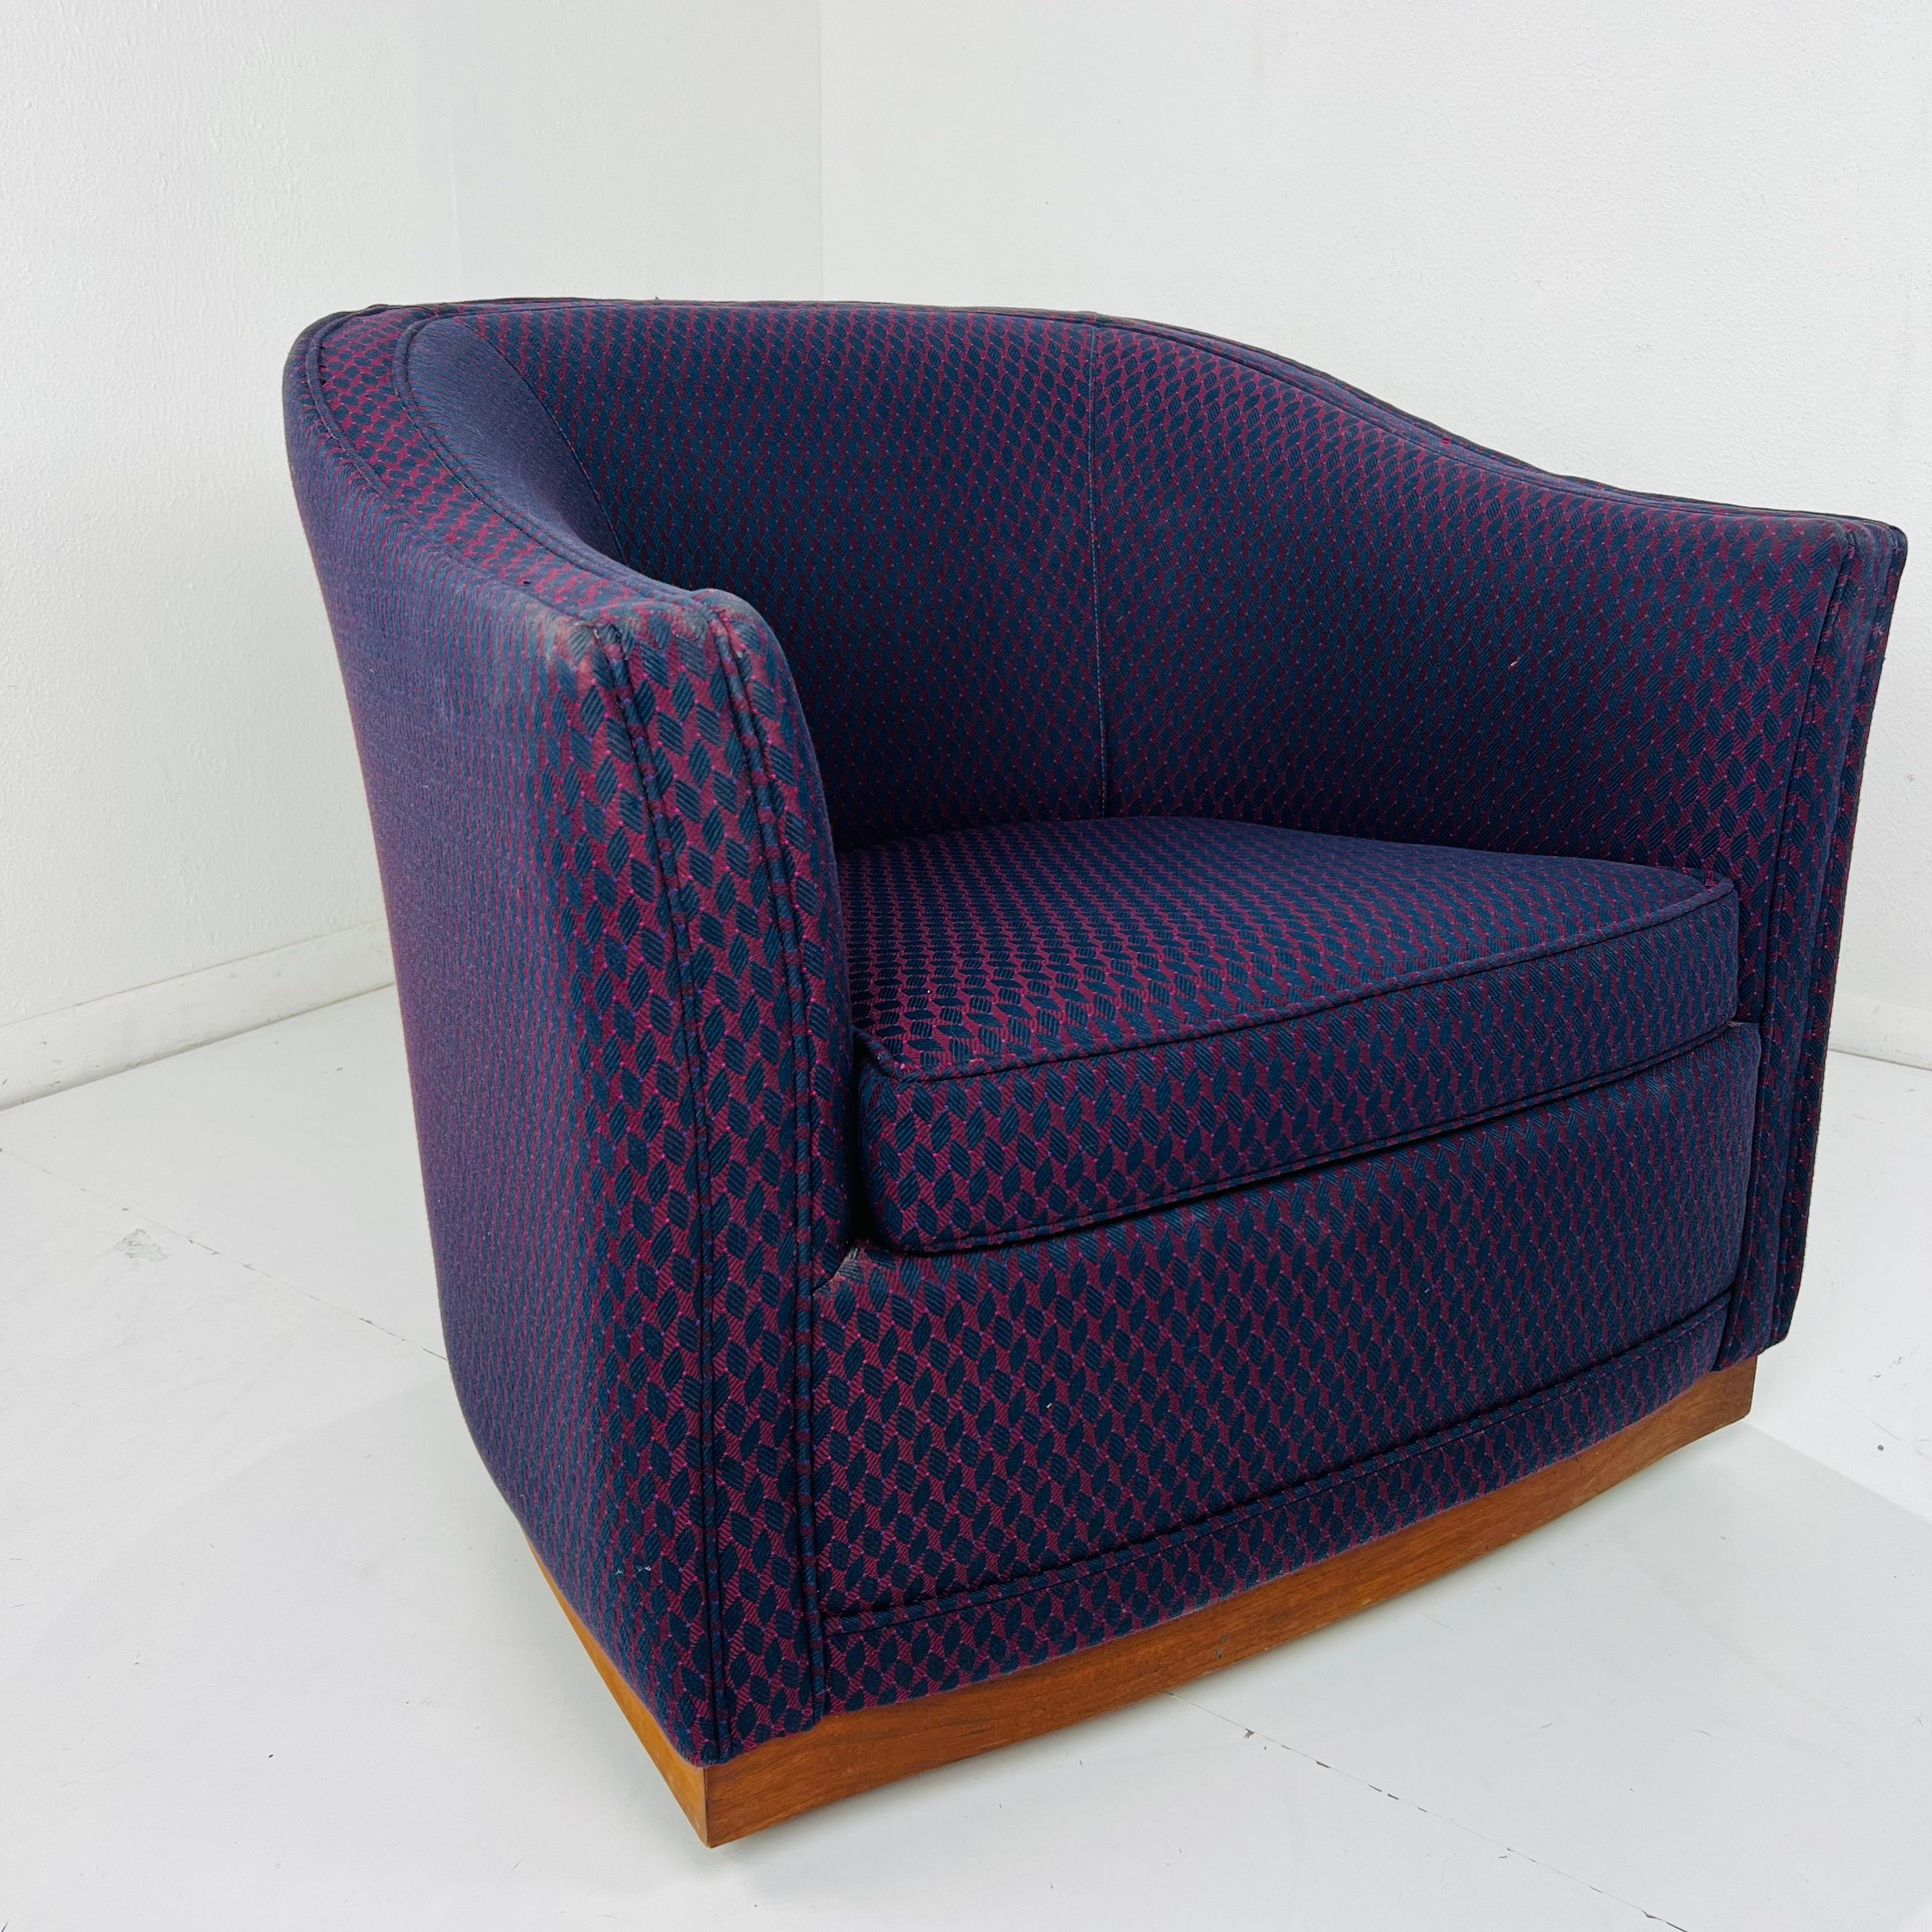 Late 20th Century Pair of Swivel Club Chairs by Jack Cartwright